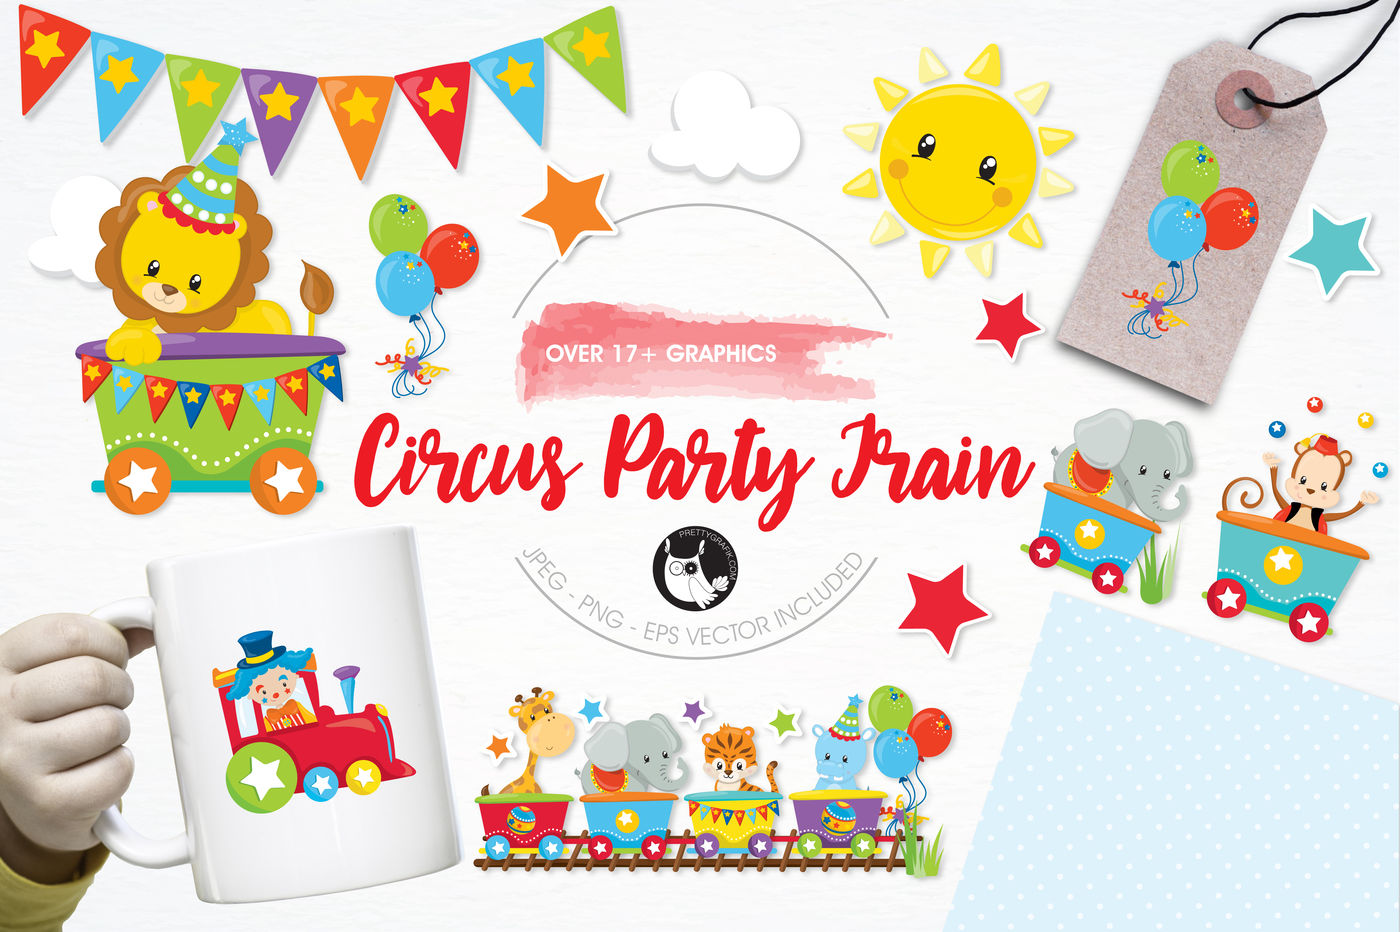 Download Circus Party Train Graphics And Illustrations By Prettygrafik Design Thehungryjpeg Com